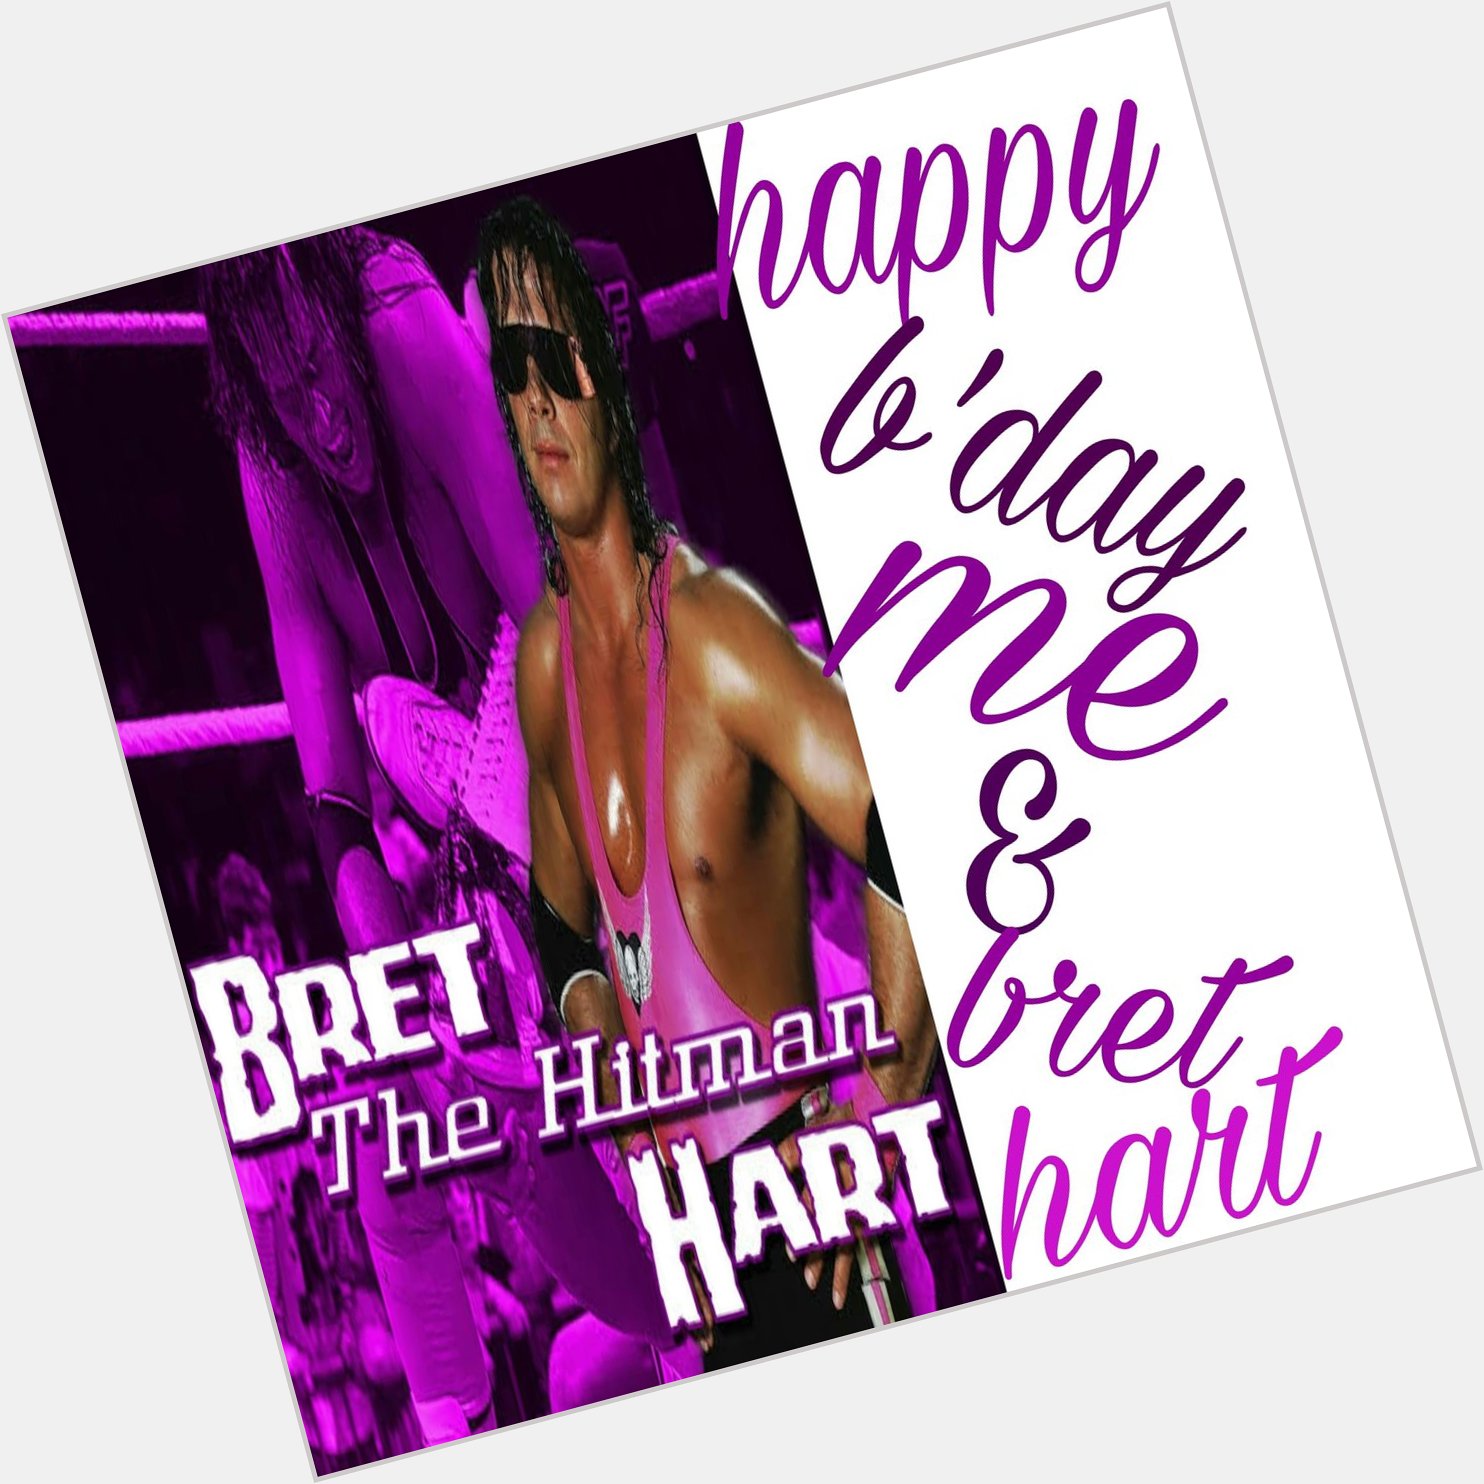  It\s  my and your birthday bret hart 

Happy birthday bret the hitman hhhhhhhhhhaaaaaarrrrrrttttttt 